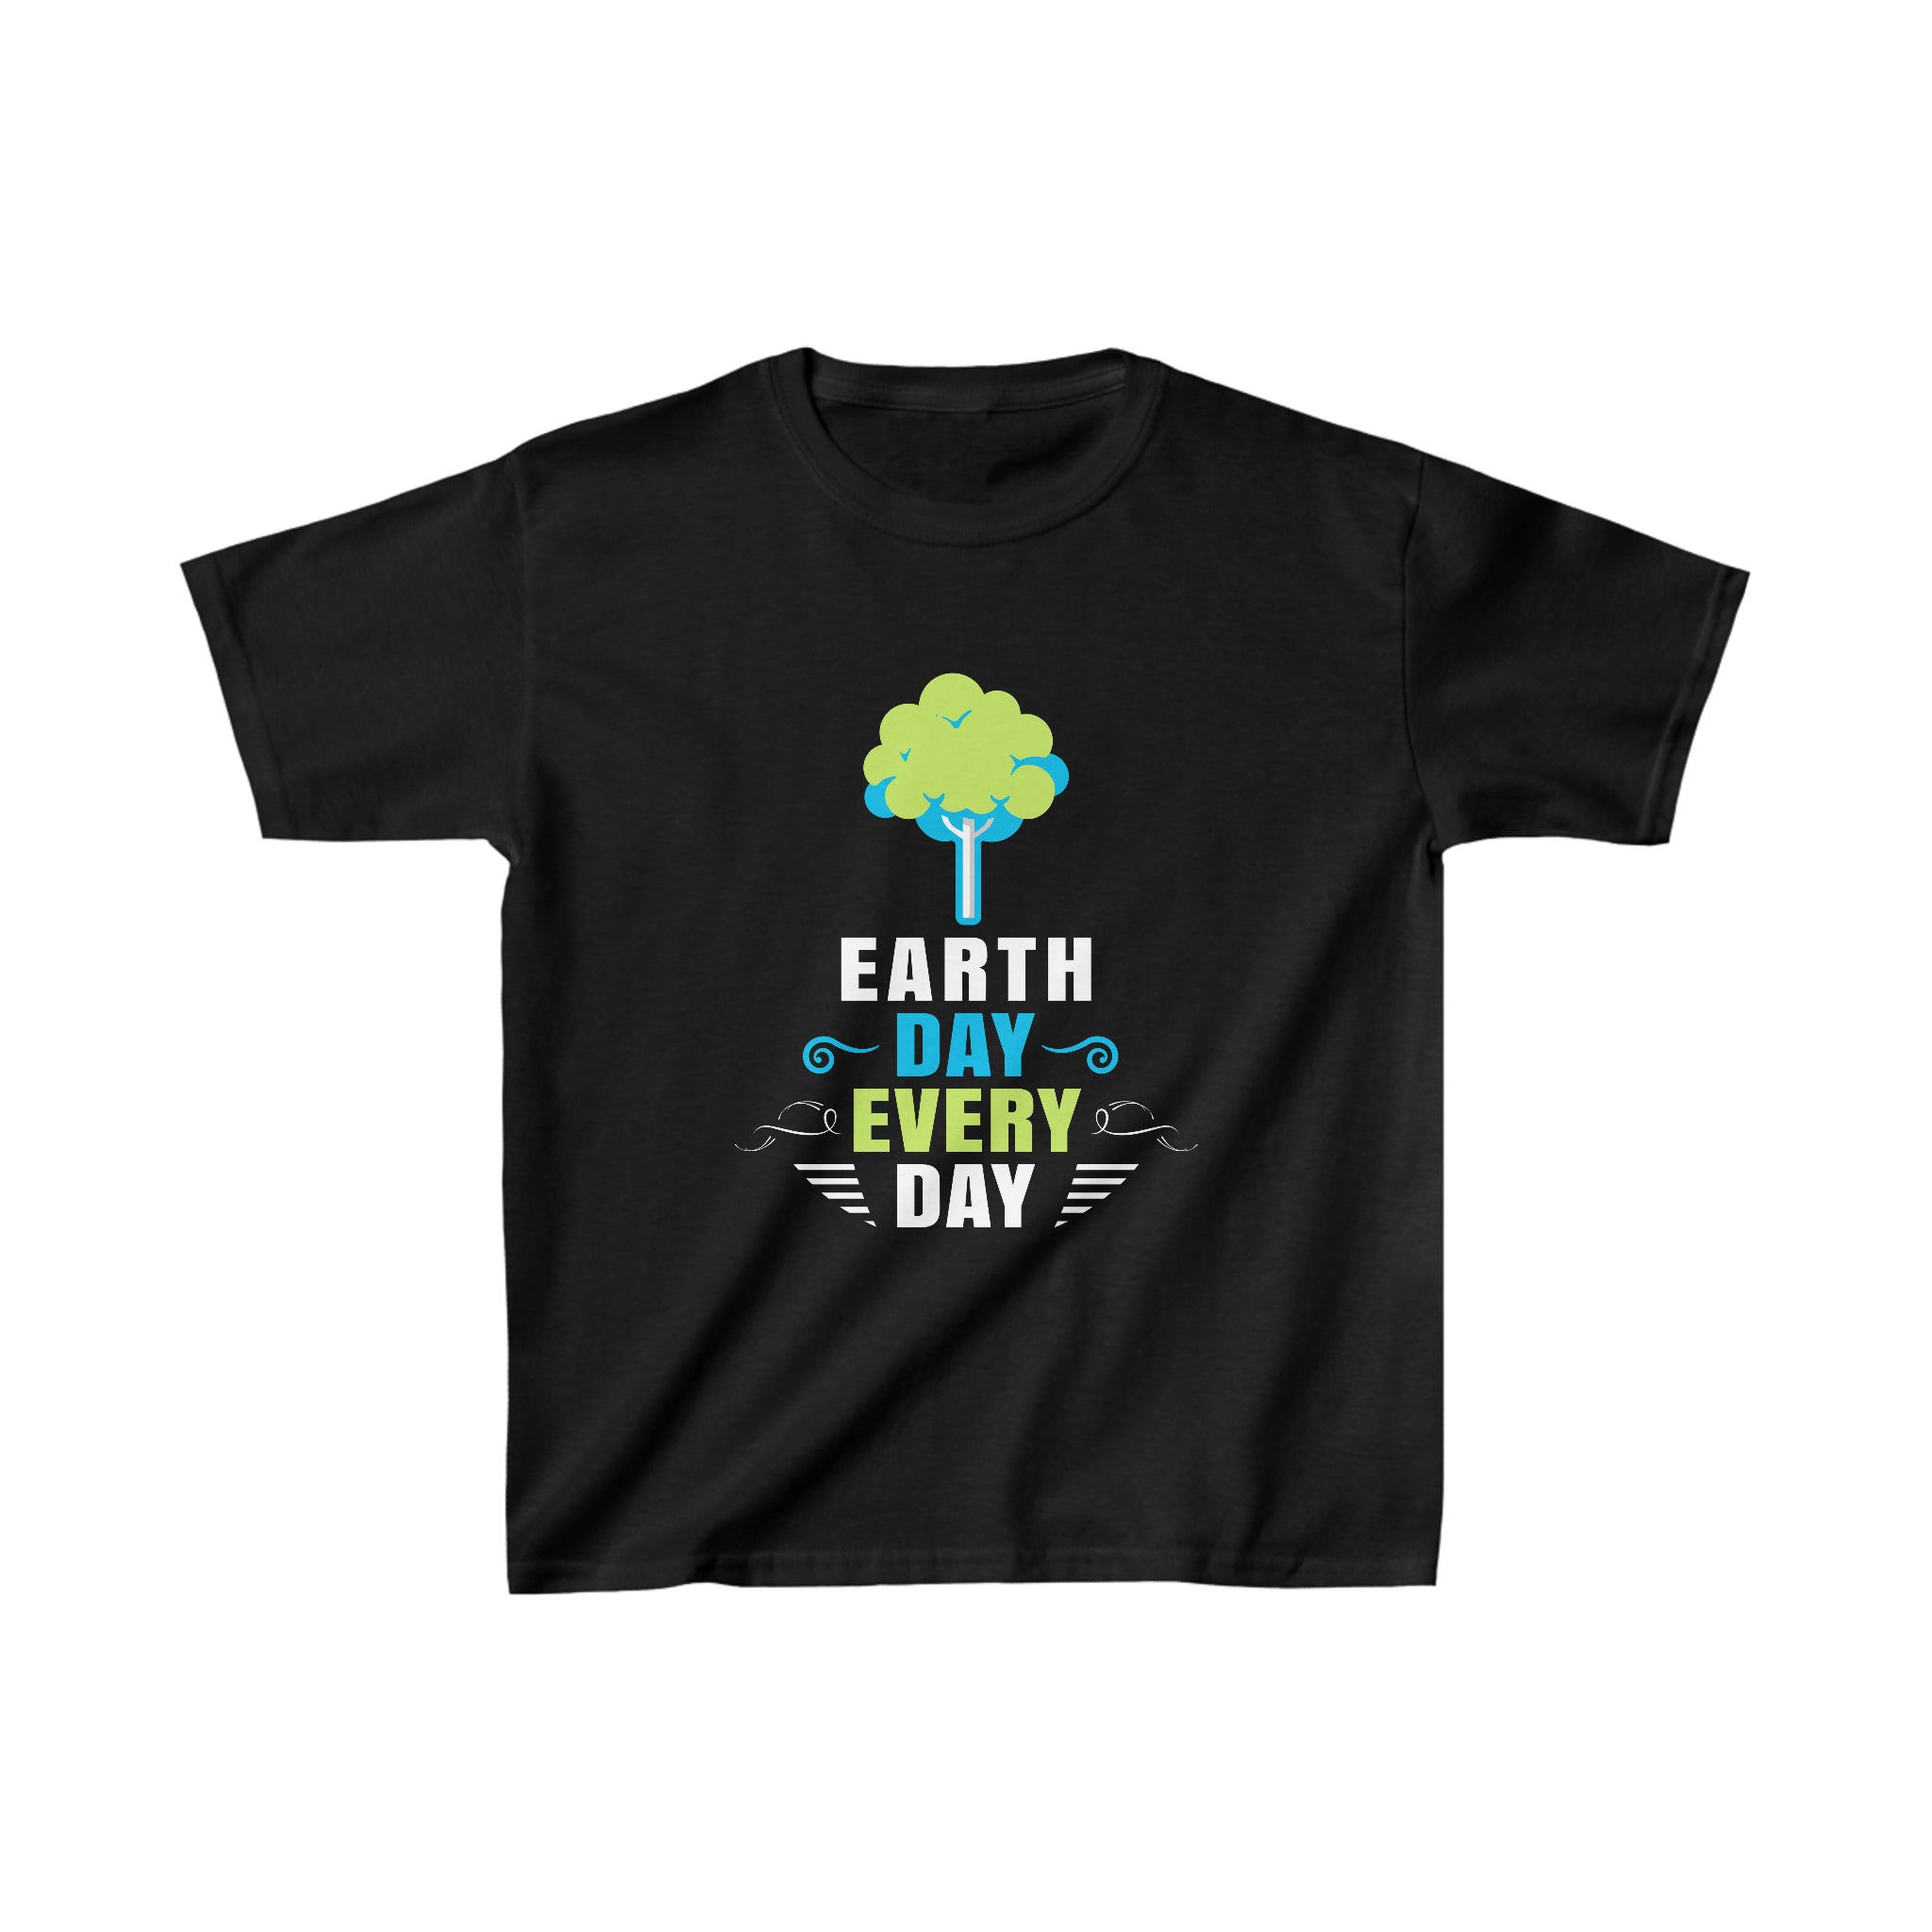 Every Day is Earth Day Crisis Environmental Activist Girls Tops